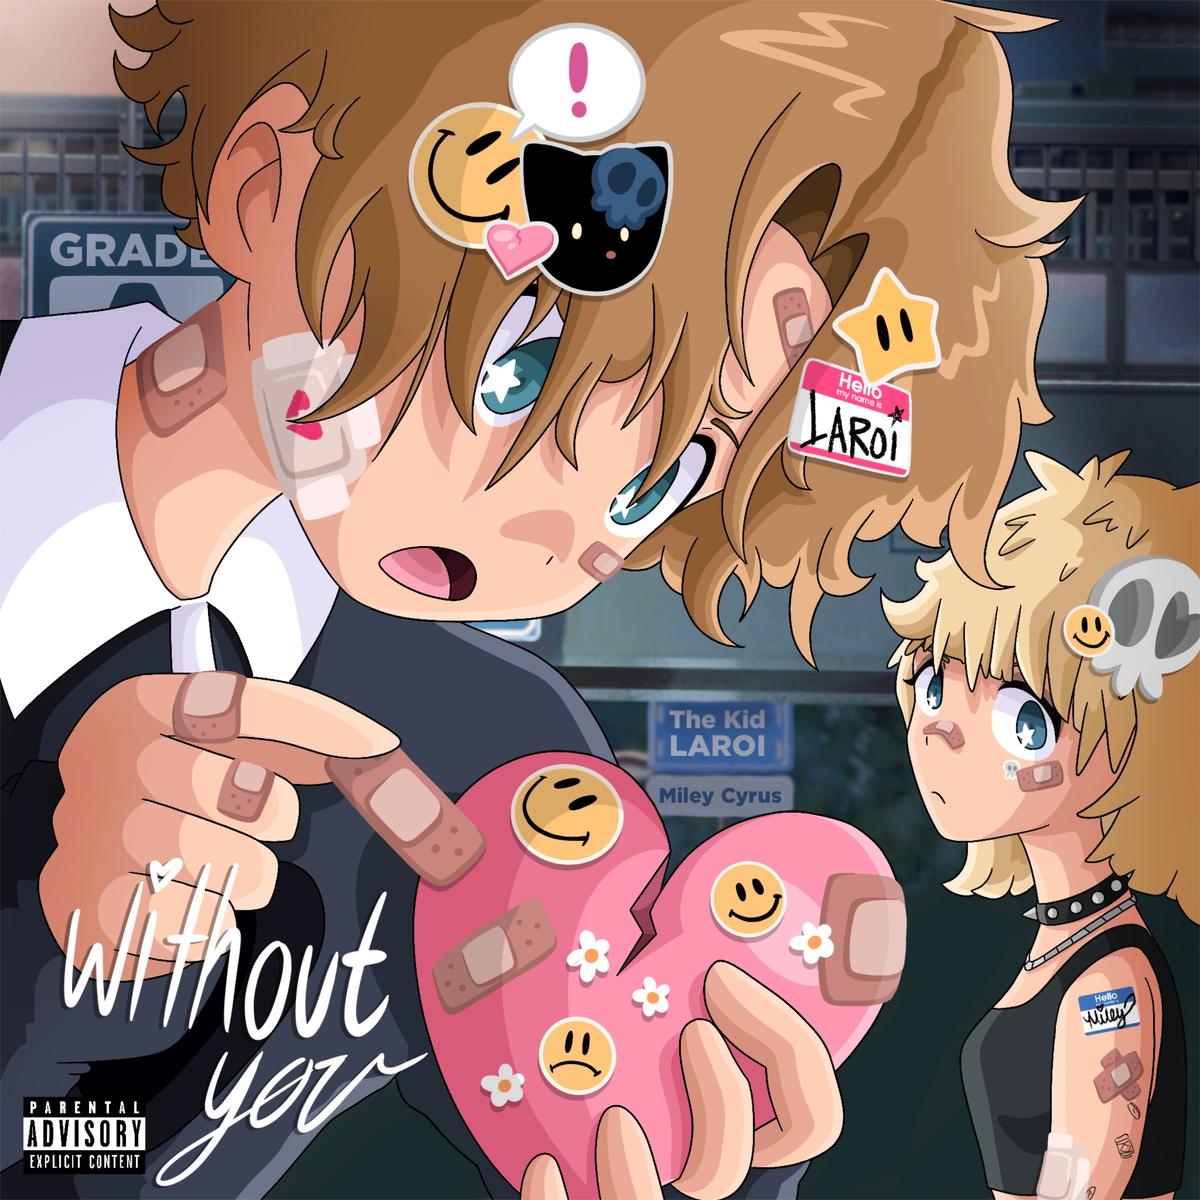 Miley Cyrus Hops On The Kid LAROI's "WITHOUT YOU" - Ratings Game Music